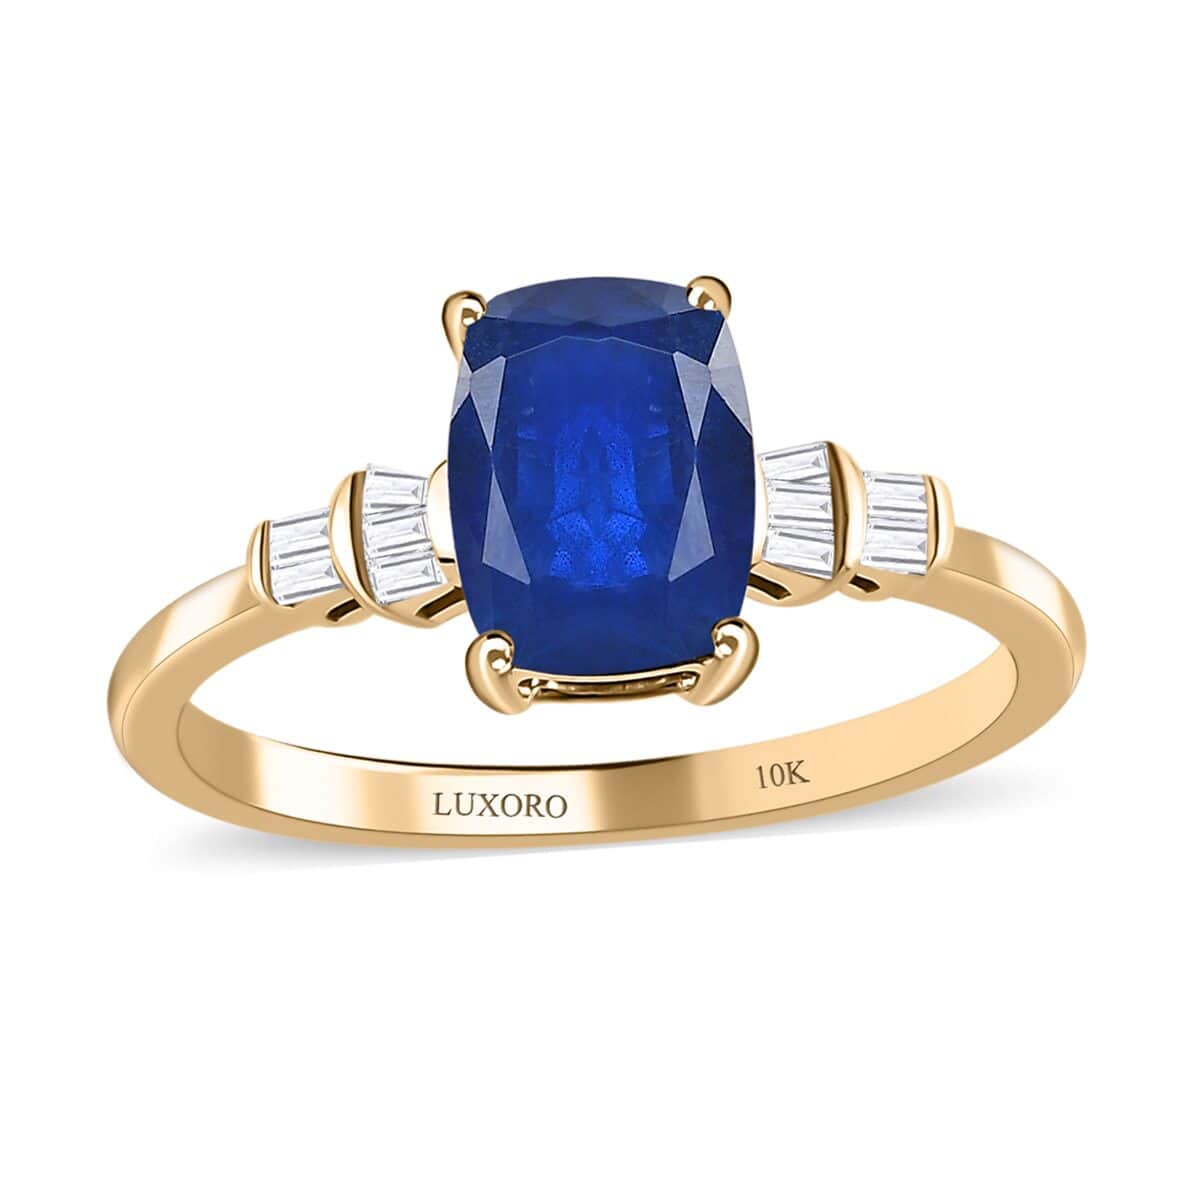 LUXORO 10K Yellow Gold Premium Tanzanian Blue Spinel, Diamond (G-H, I3) Ring (Size 10.0) (2.15 g) 1.75 ctw image number 0